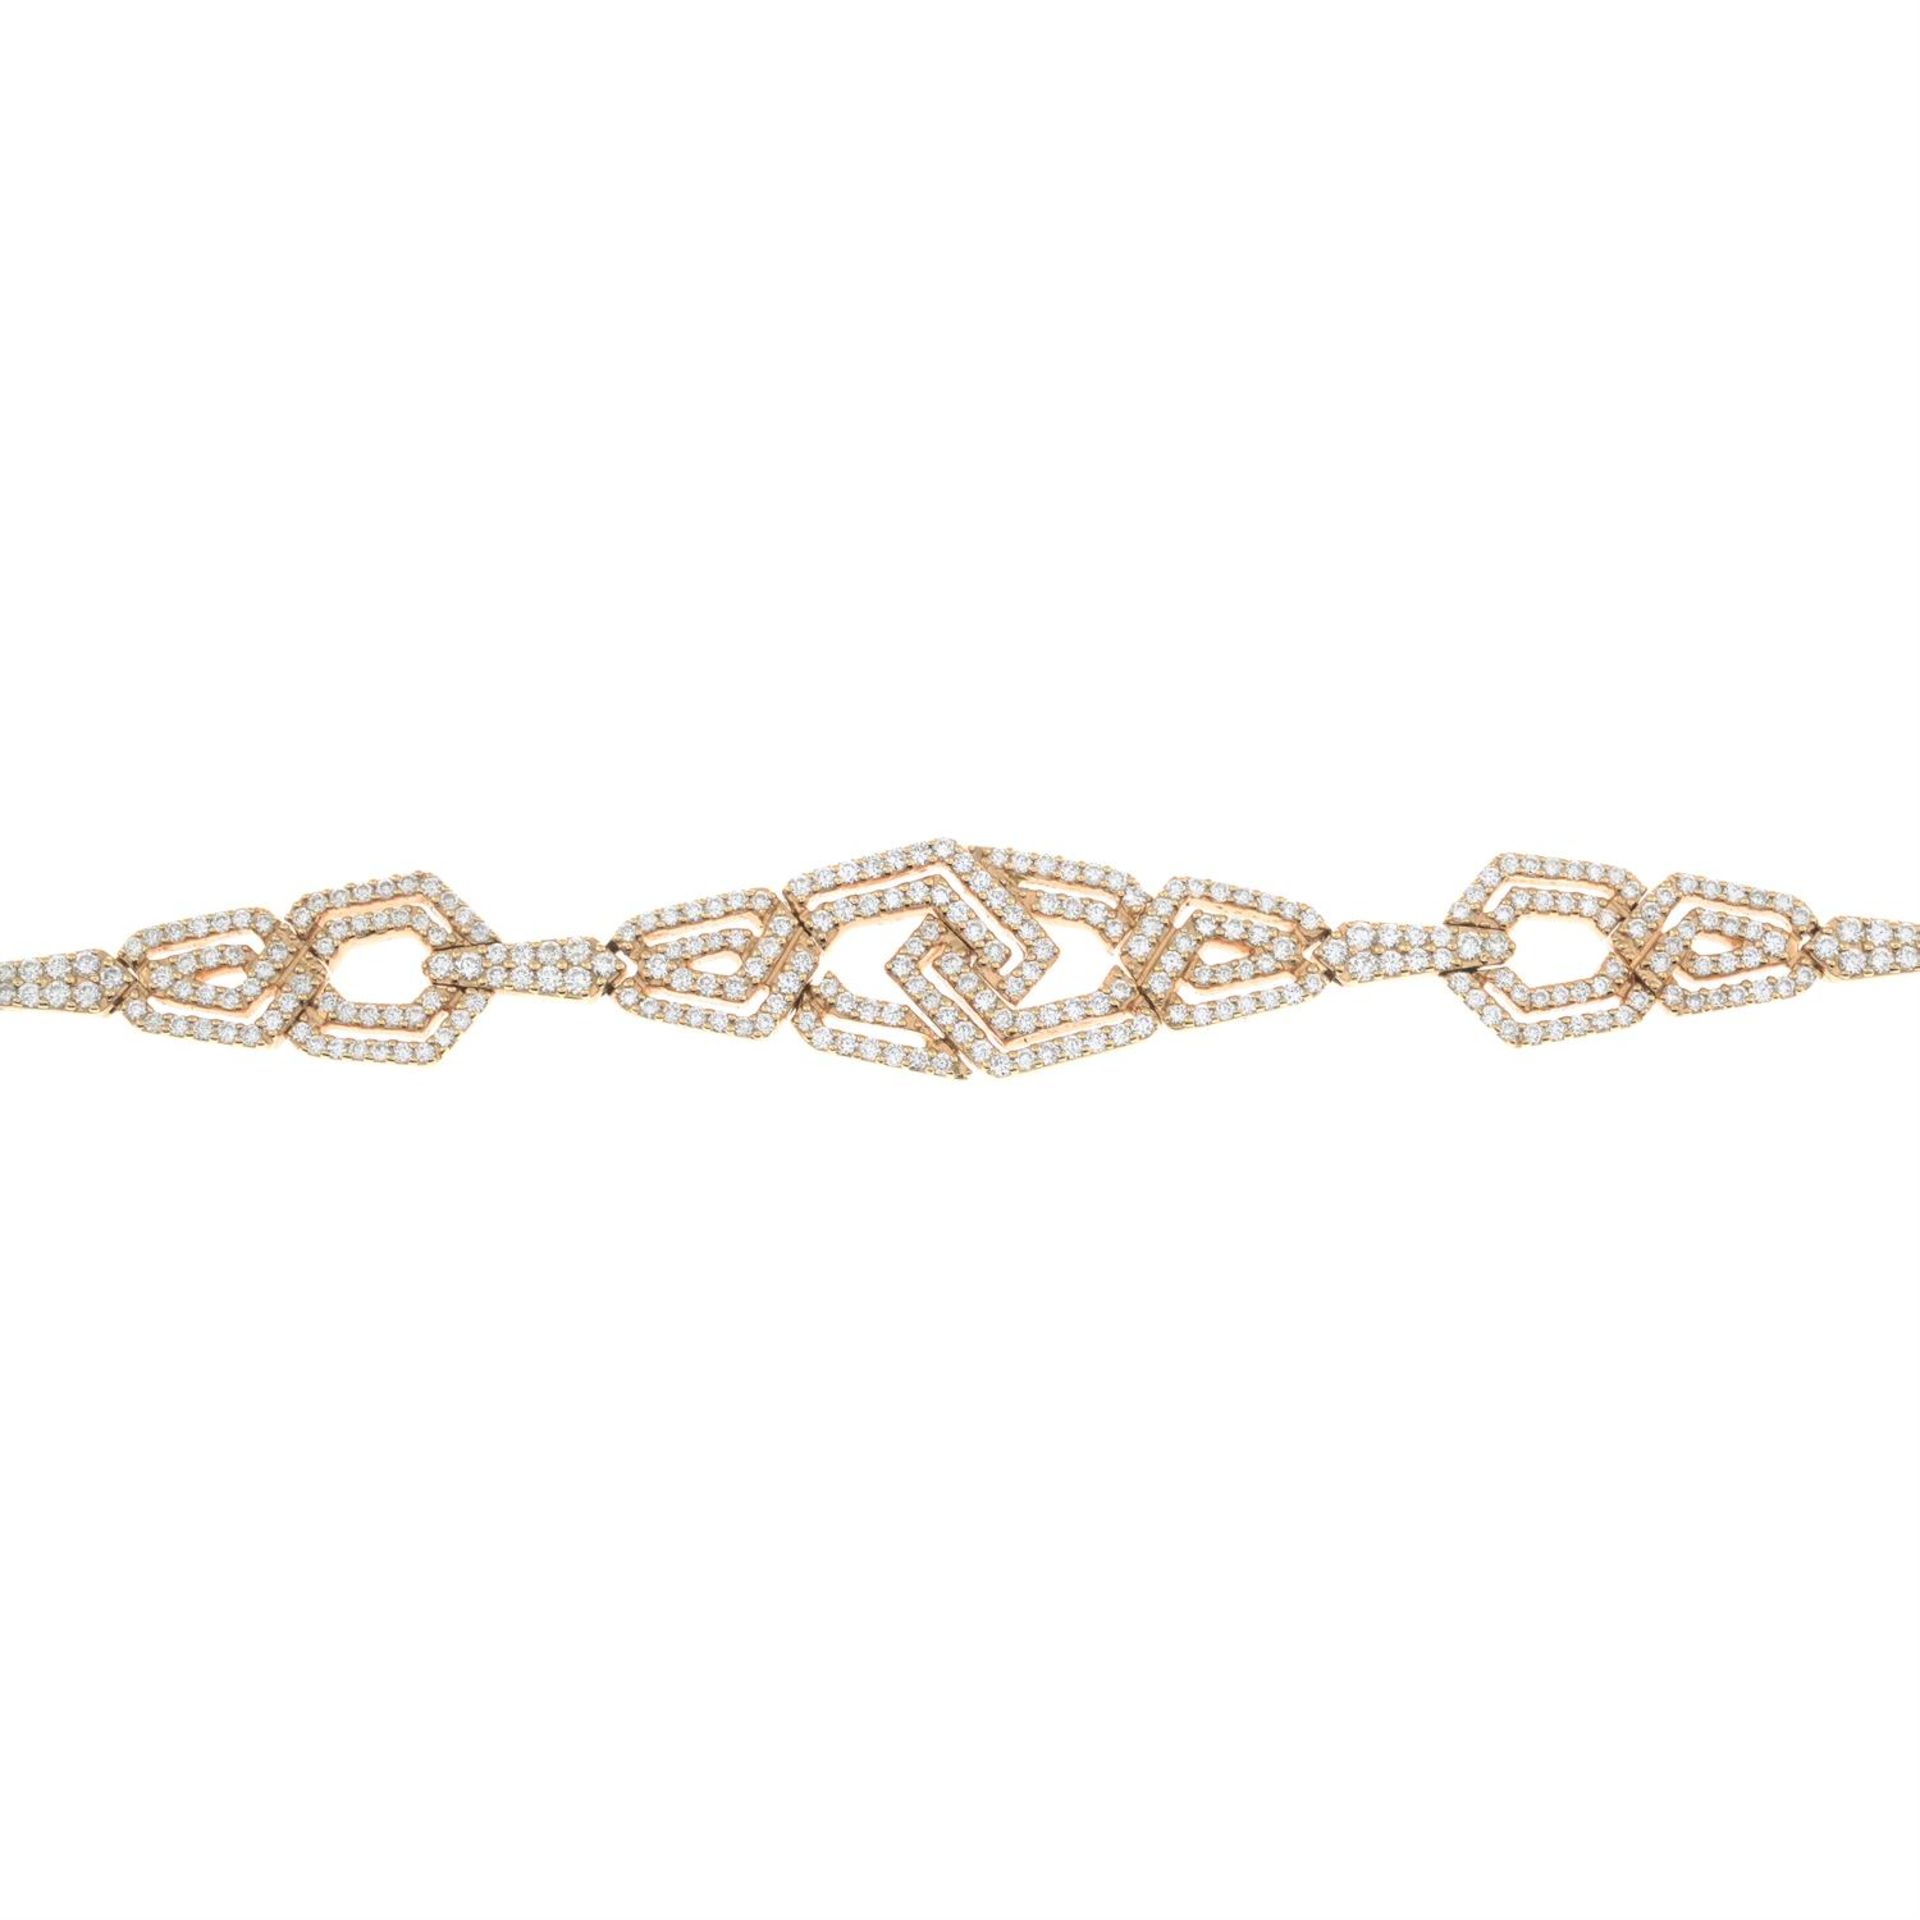 An 18ct gold diamond 'The London Collection' geometric bracelet. - Image 2 of 5